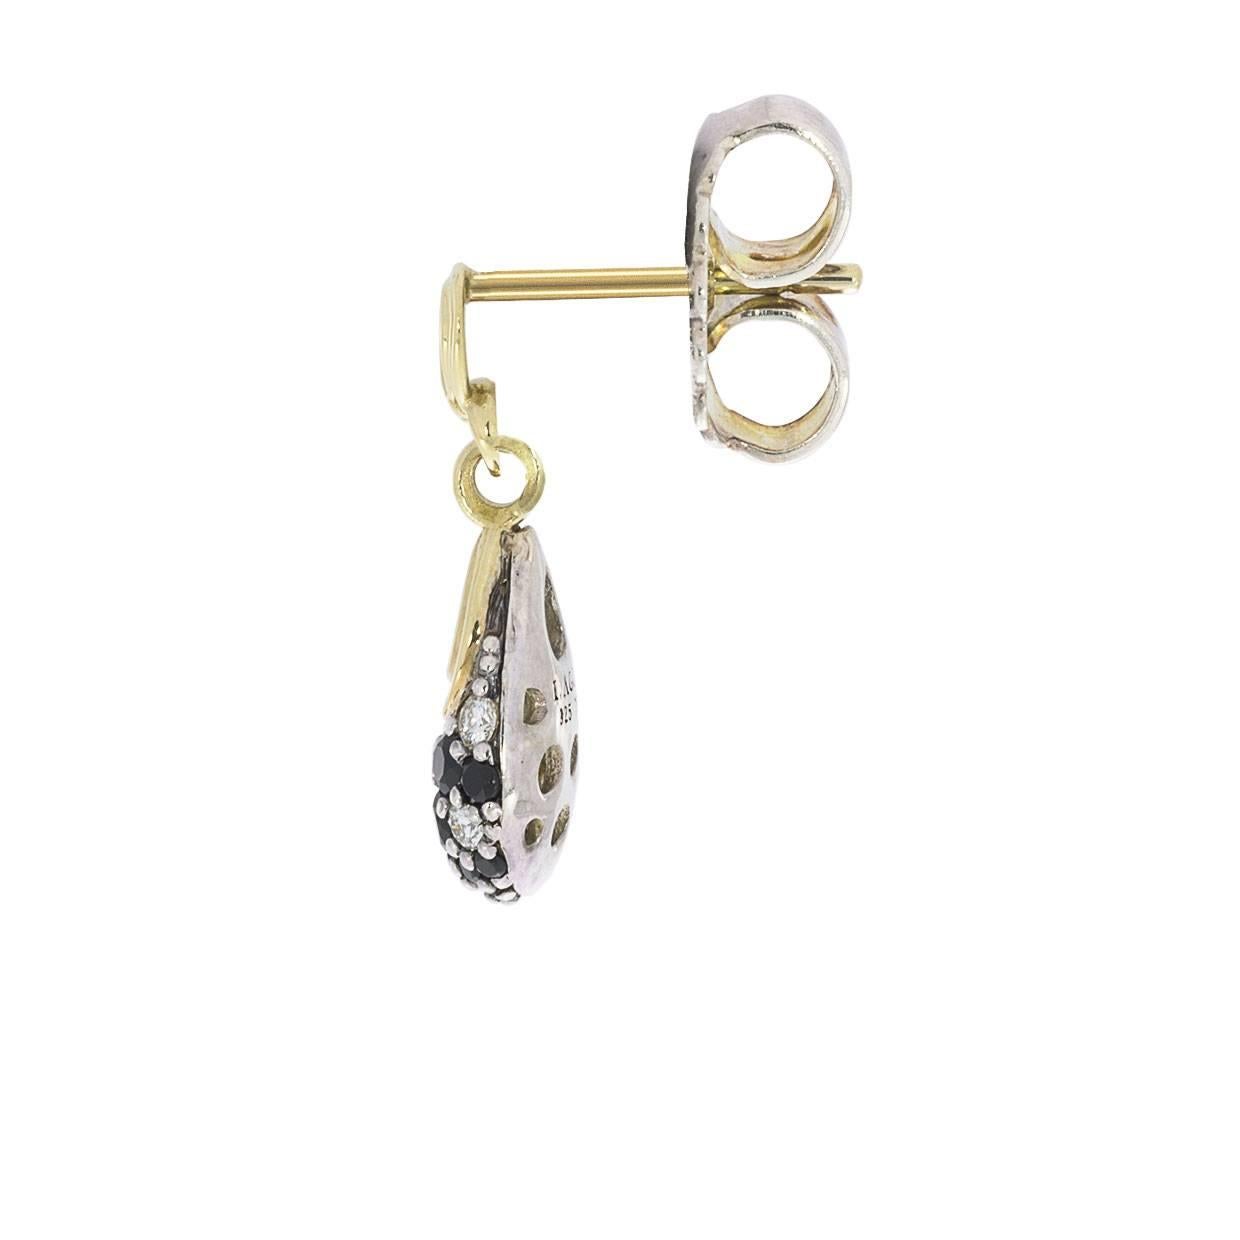 Round Cut Lagos Nightfall Pave Black Spinel Diamond Gold and Silver Teardrop Earrings